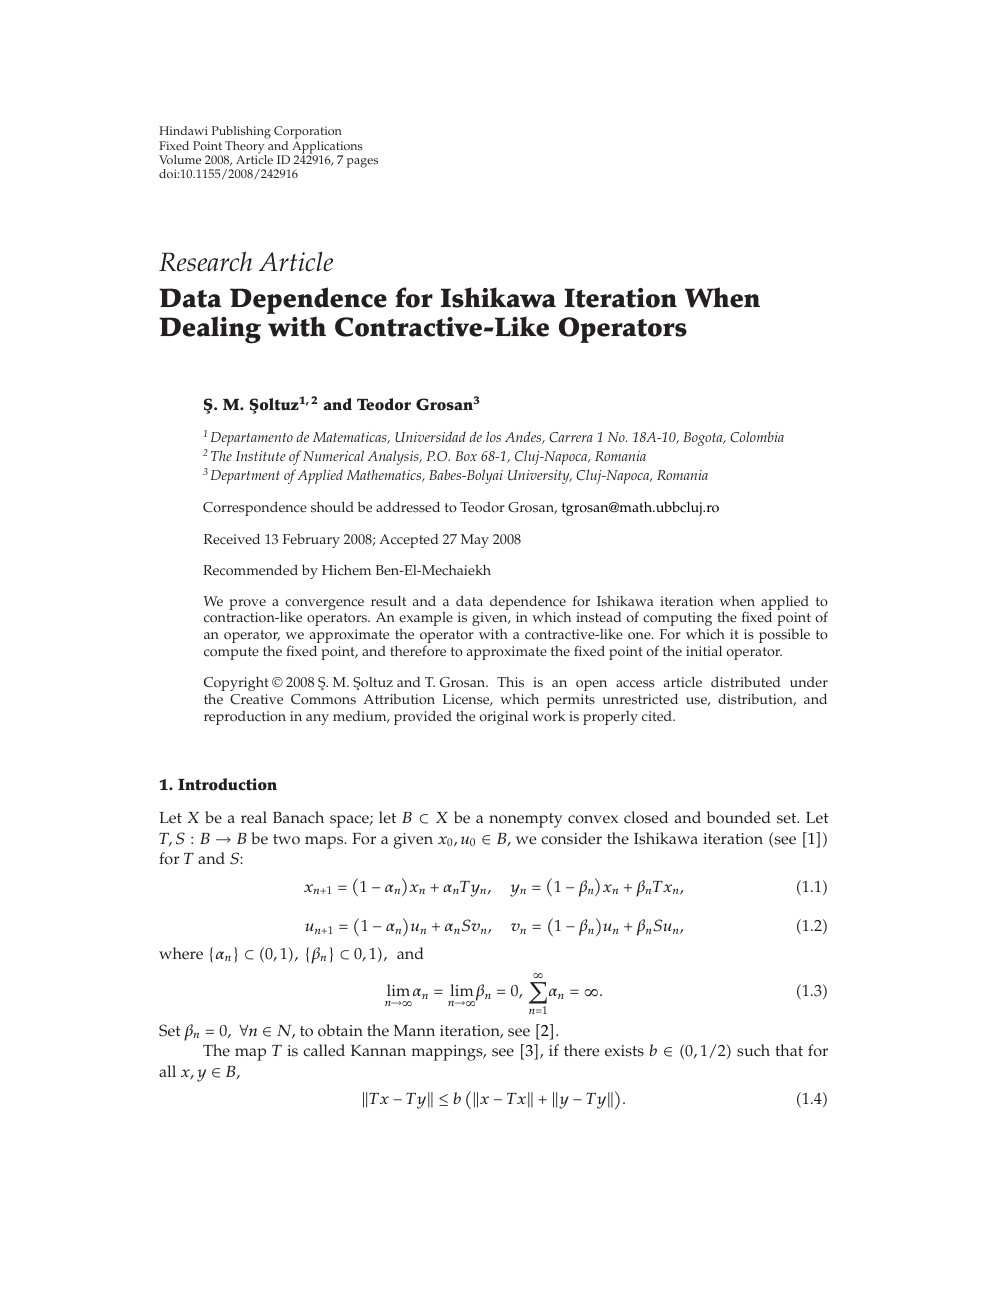 Data Dependence For Ishikawa Iteration When Dealing With Contractive Like Operators Topic Of Research Paper In Mathematics Download Scholarly Article Pdf And Read For Free On Cyberleninka Open Science Hub